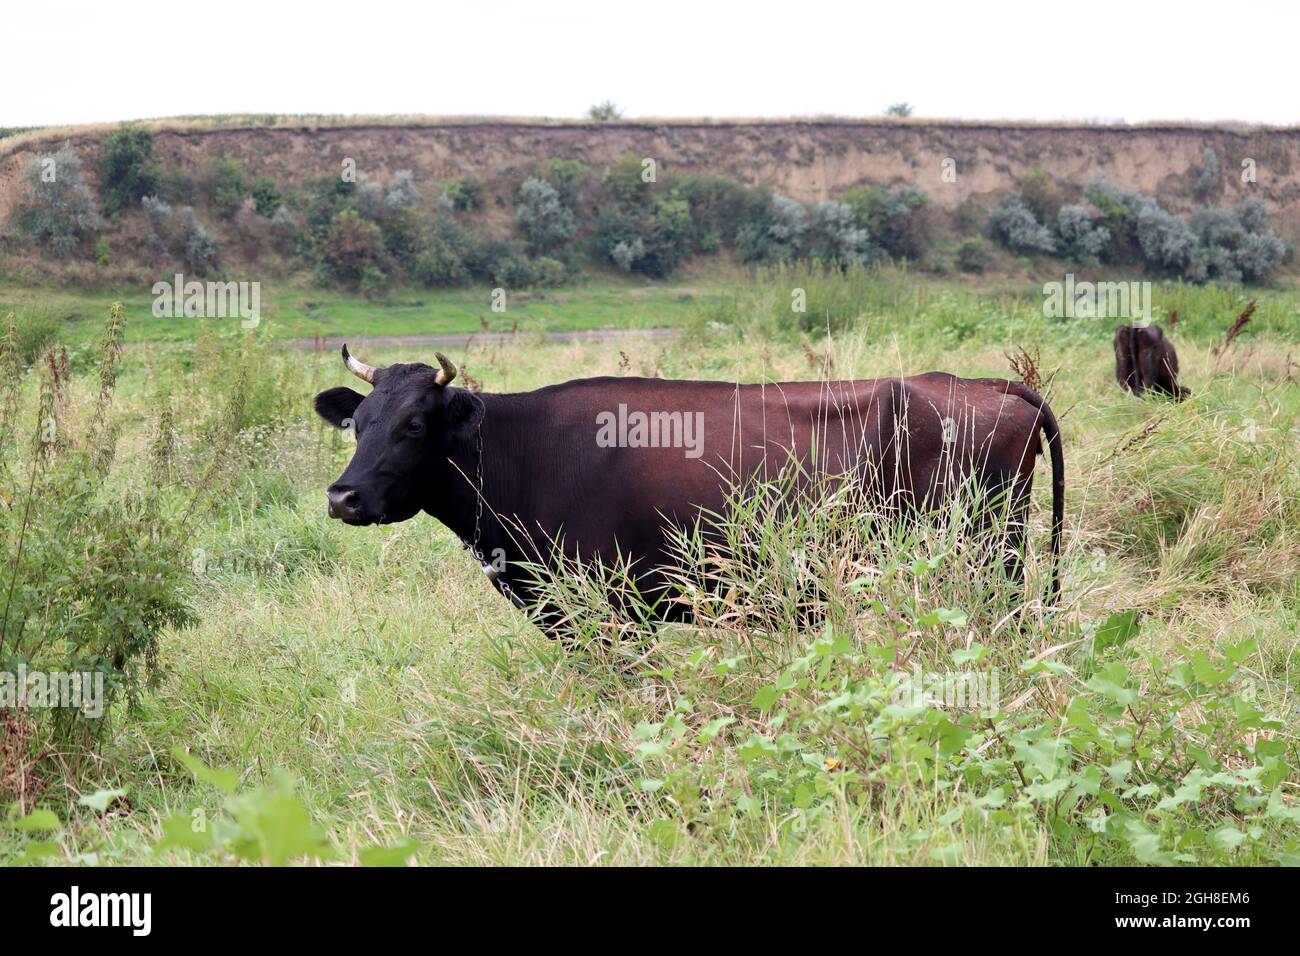 Cows grazing on a green meadow on hills background. Black cow on a leash eating grass in a pasture, rural scene, farming and milk production concept Stock Photo